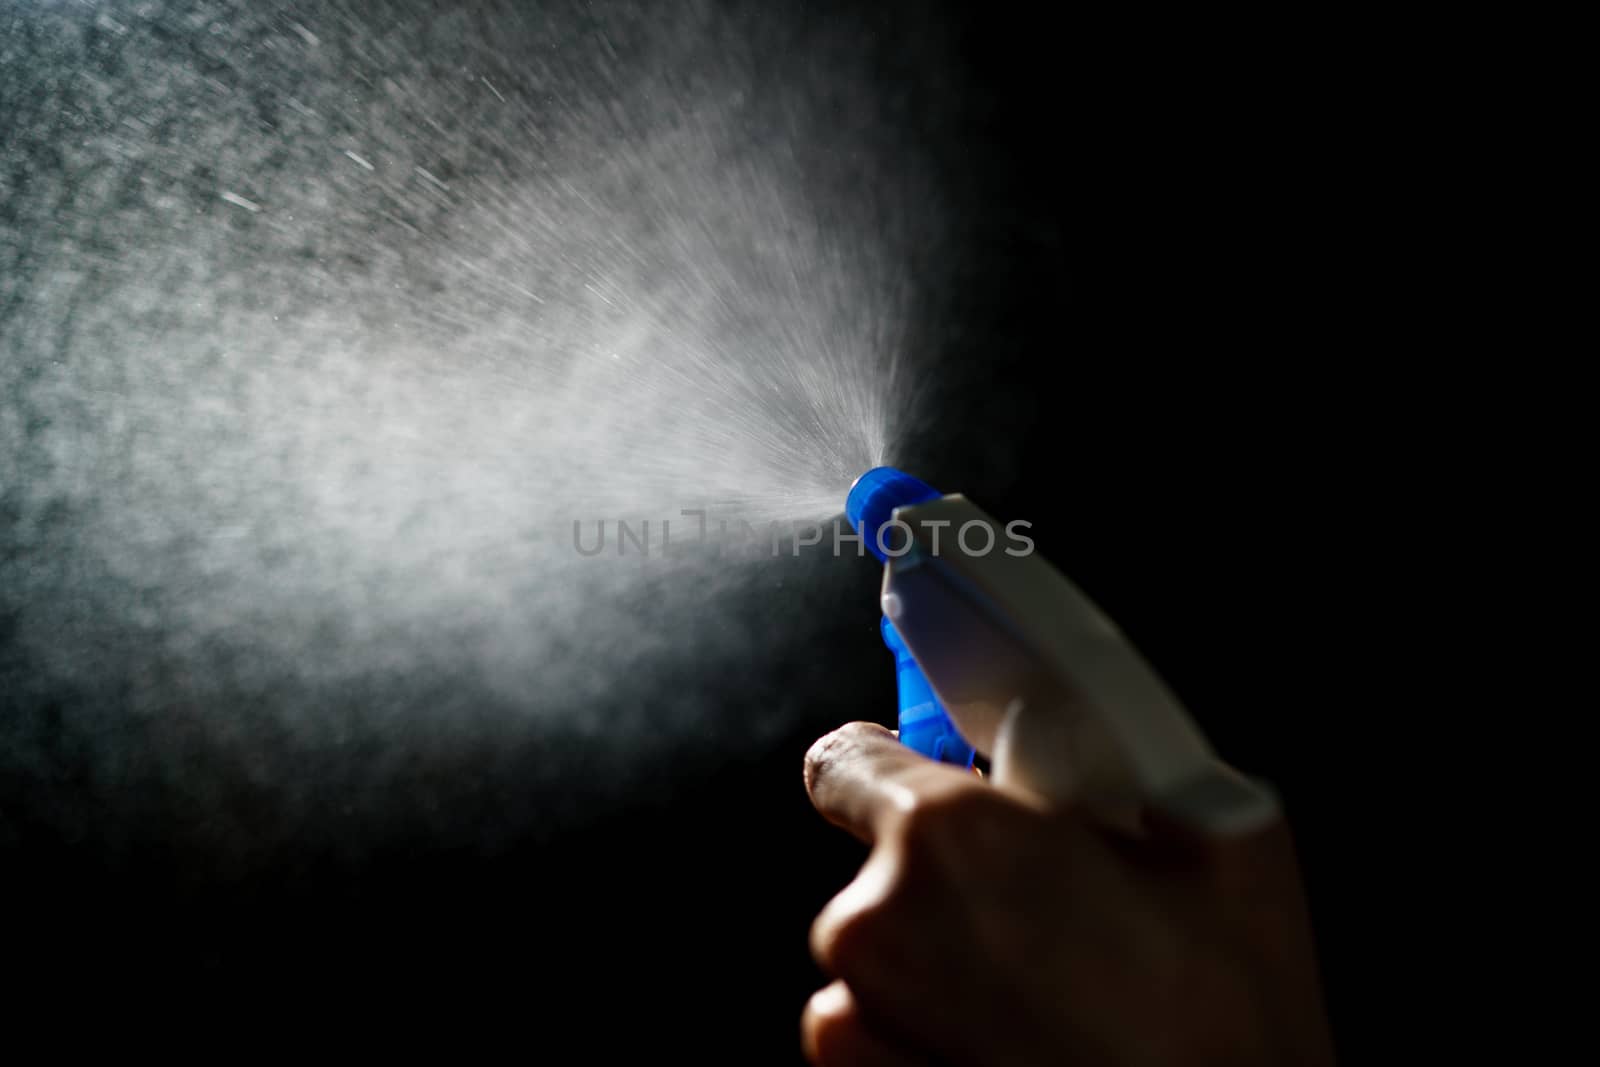 Woman's hands with blue foggy spraying disinfectant to stop spreading coronavirus or COVID-19.